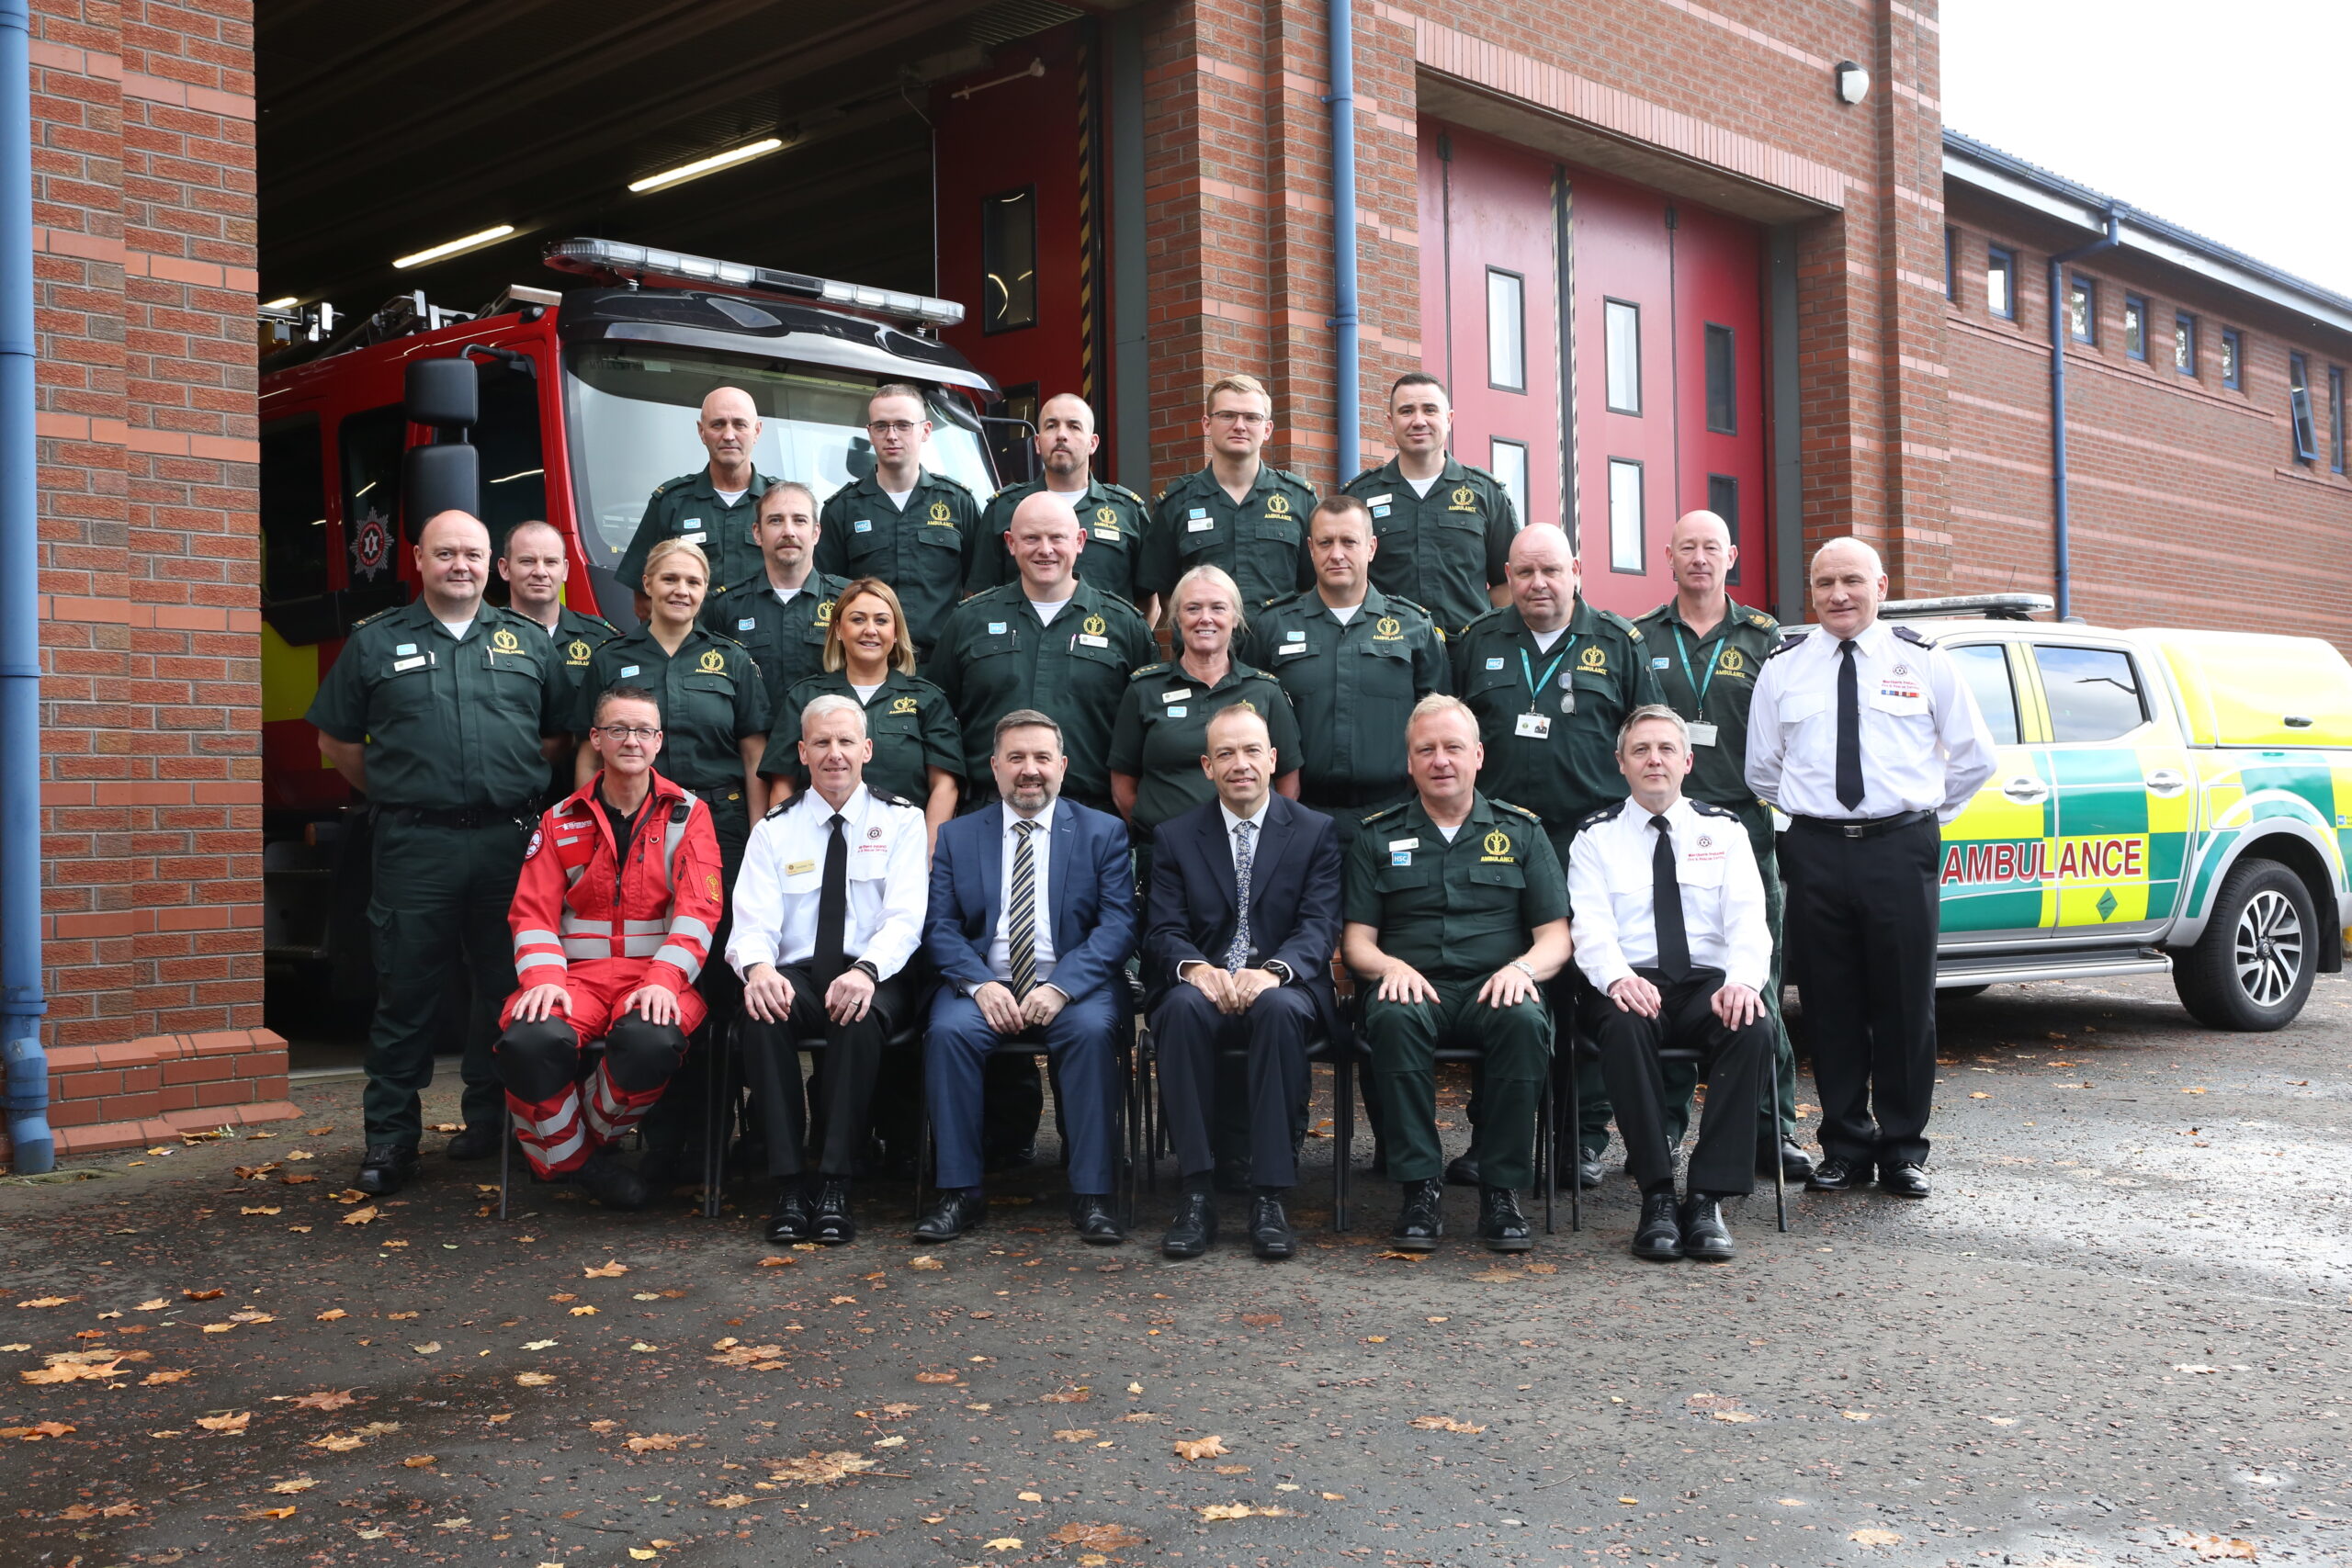 This is group photo showing first responders to the Cresslough Incident